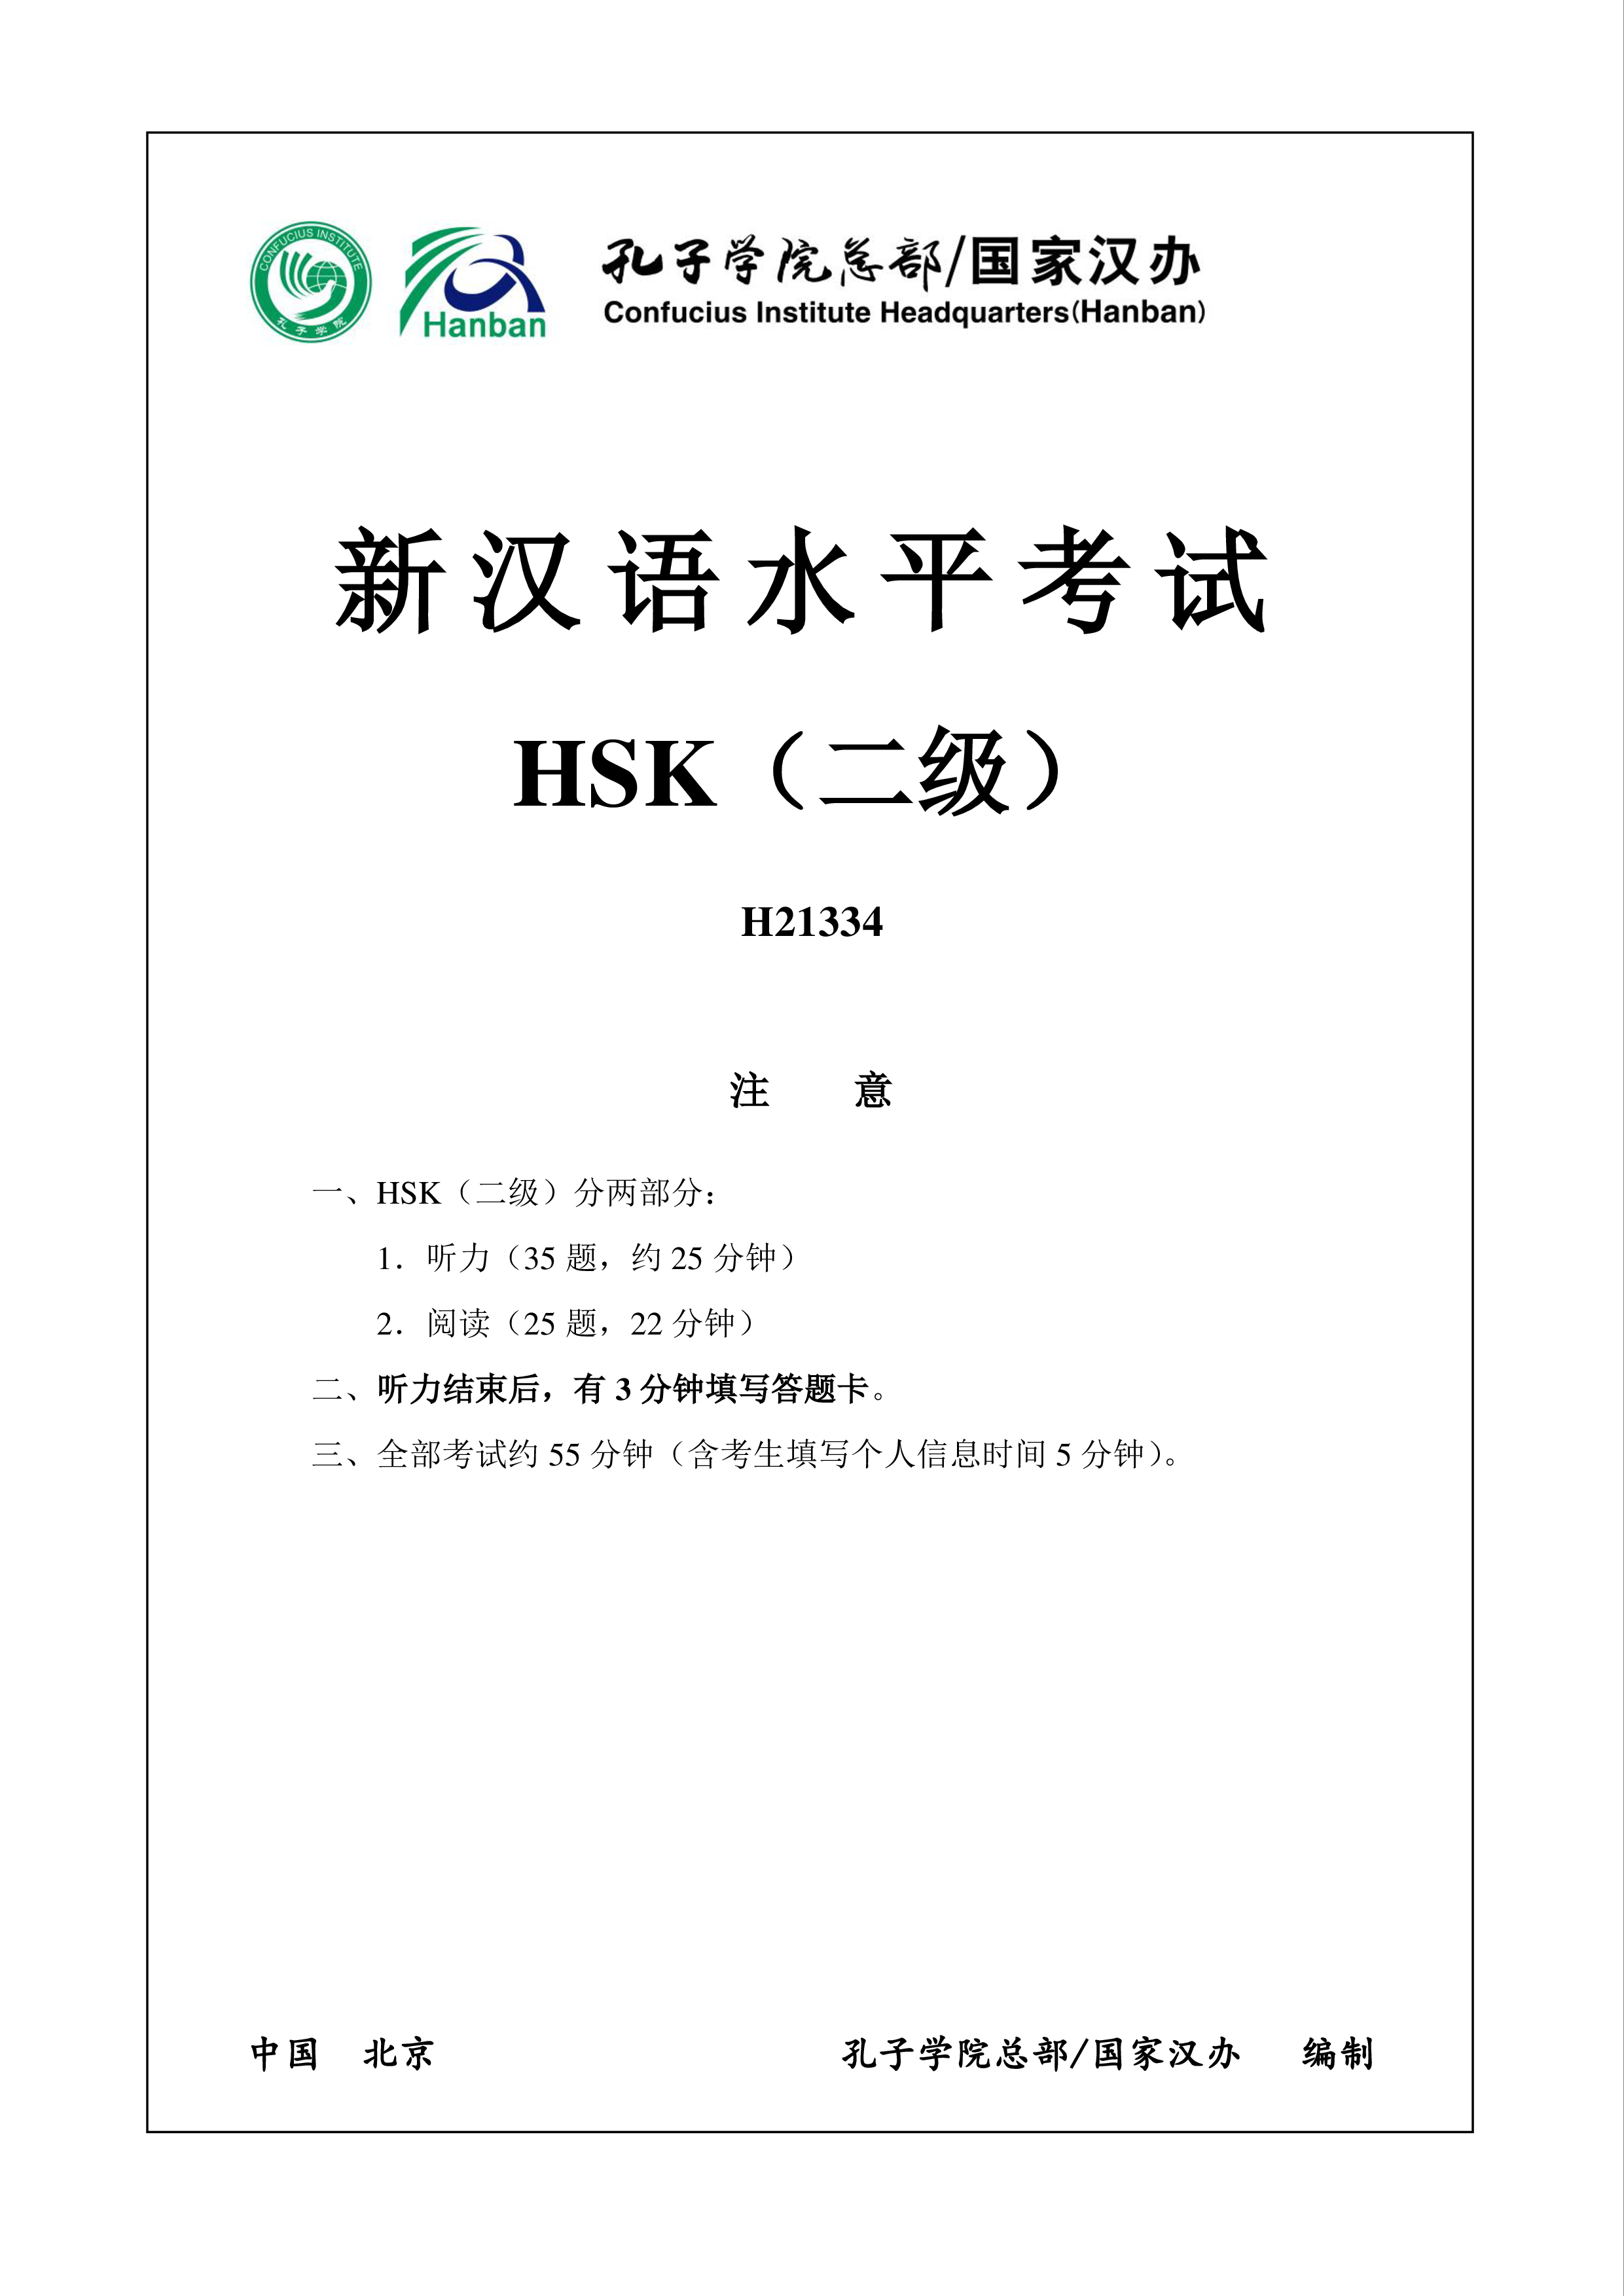 hsk2 chinese exam including answers # hsk2 h21334 modèles